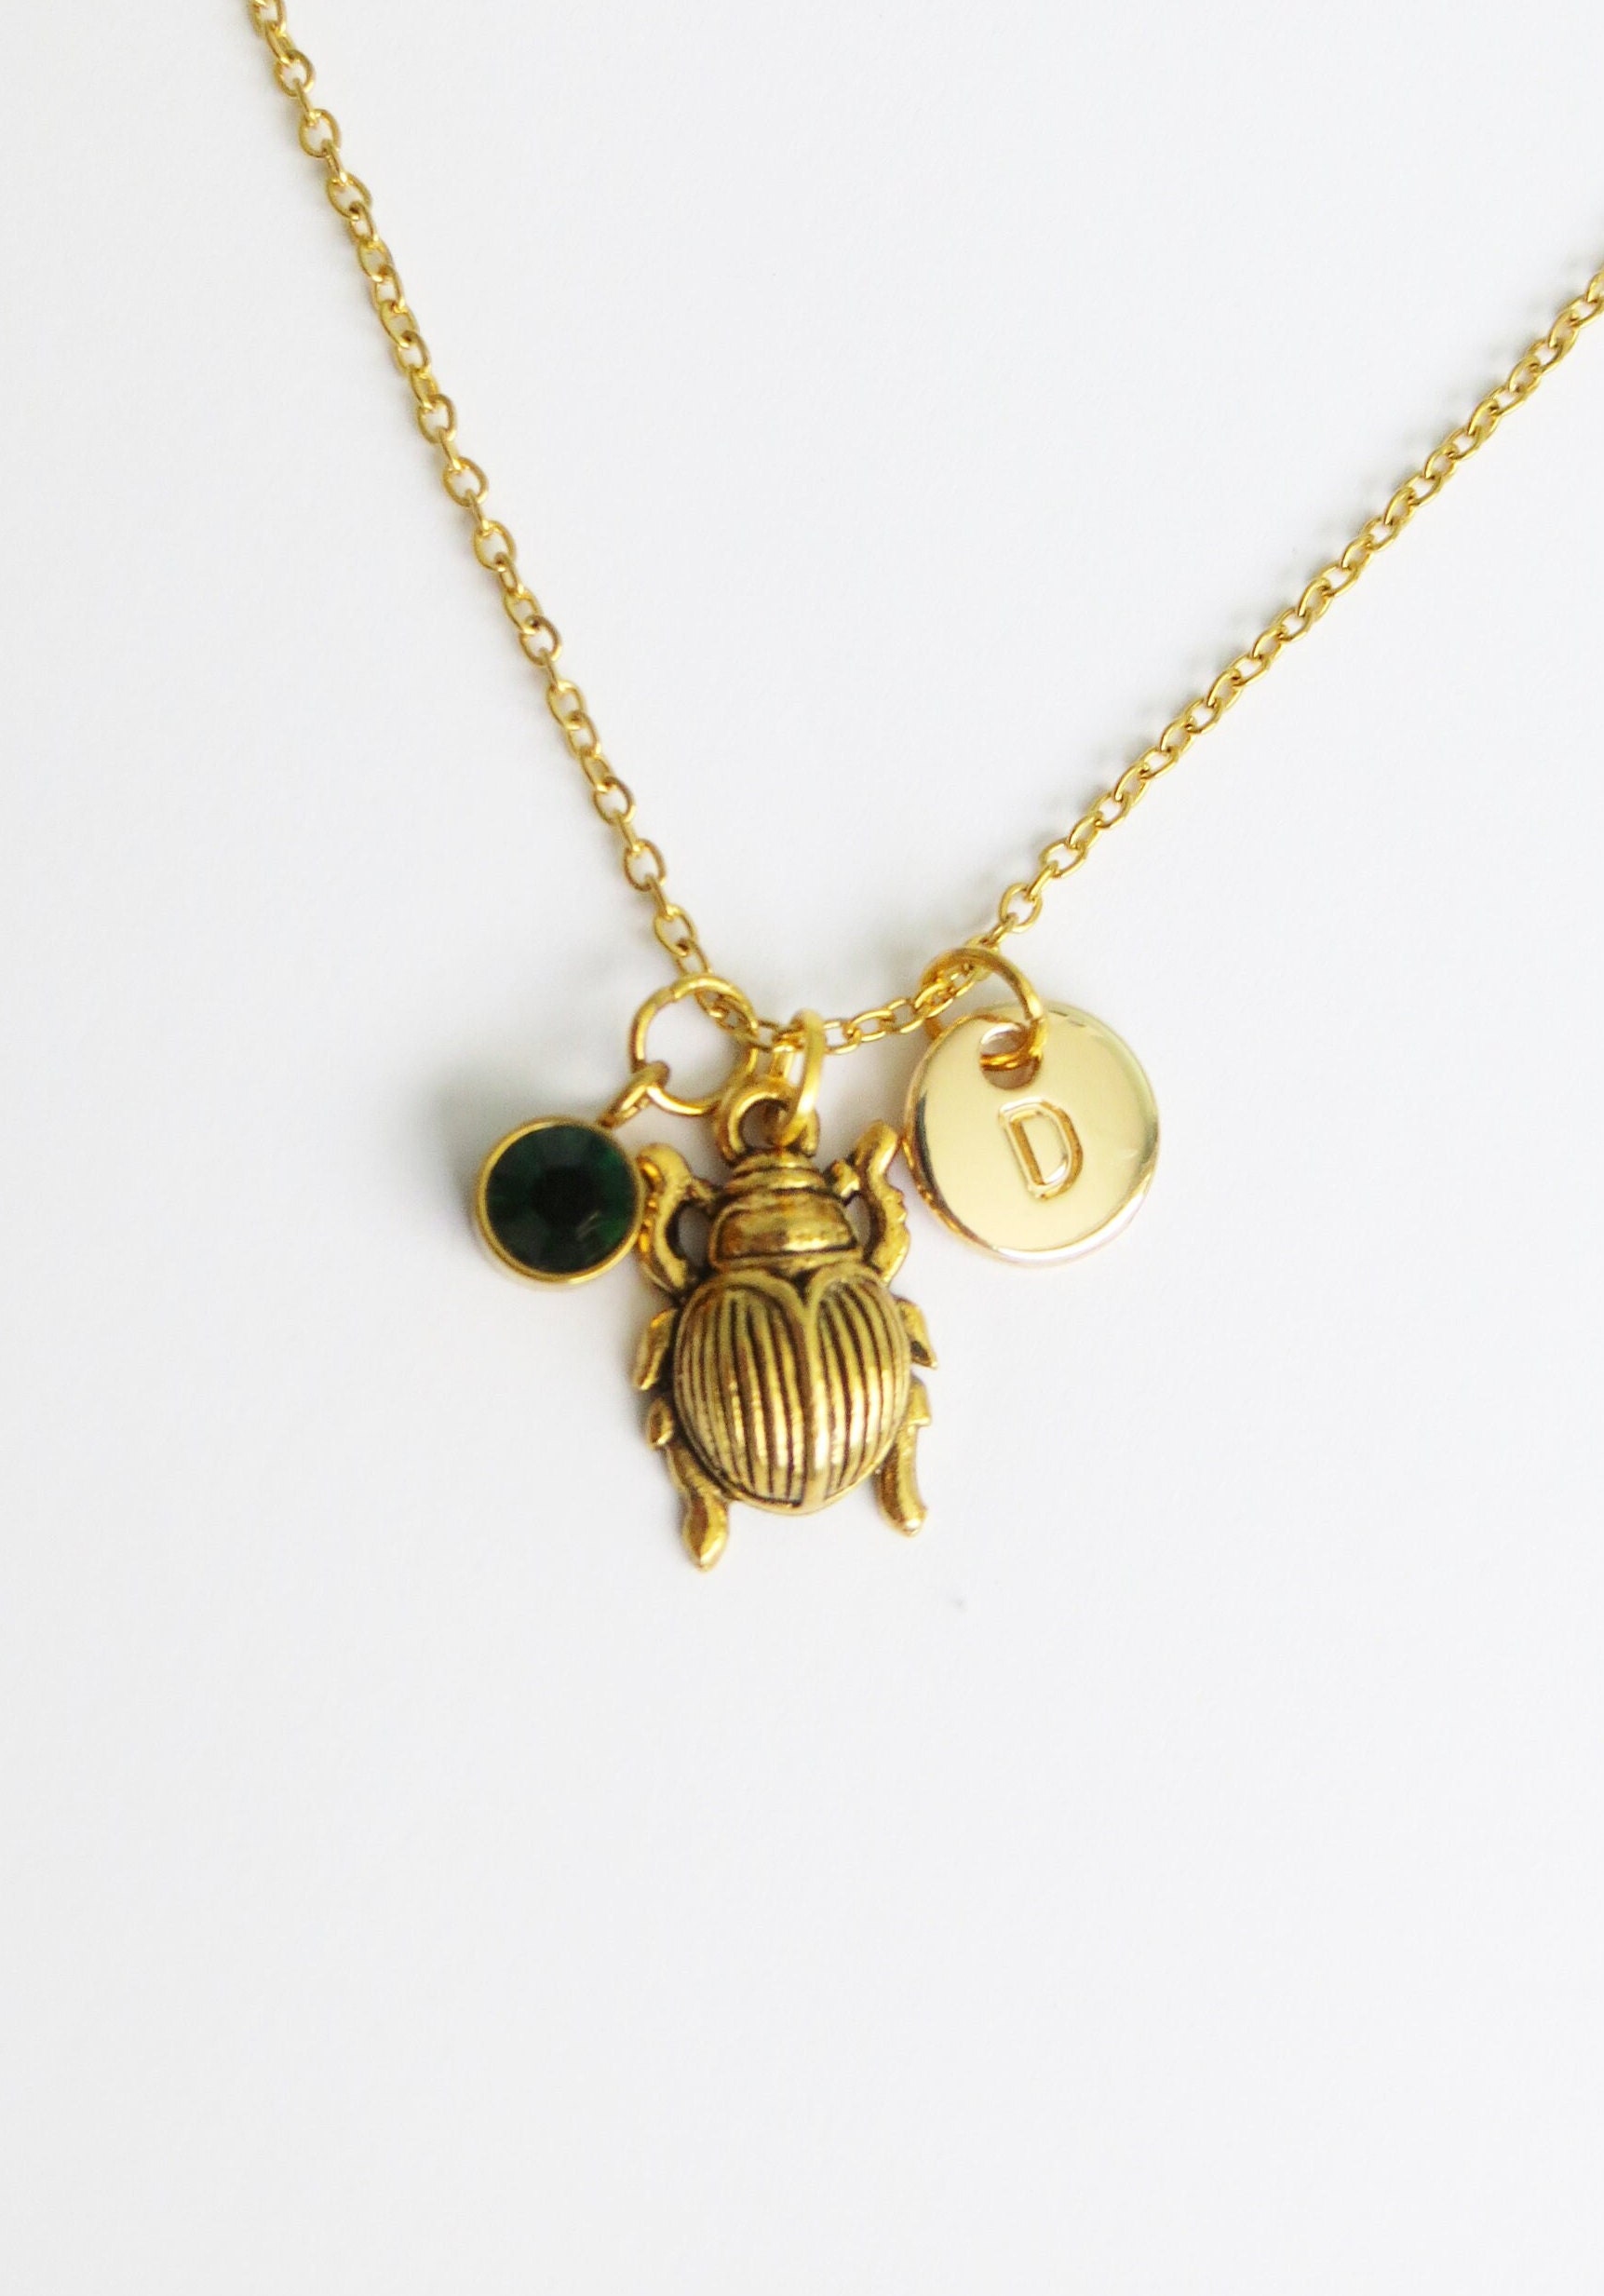 Insect-inspired jewelry puts the bug in the spotlight - Los